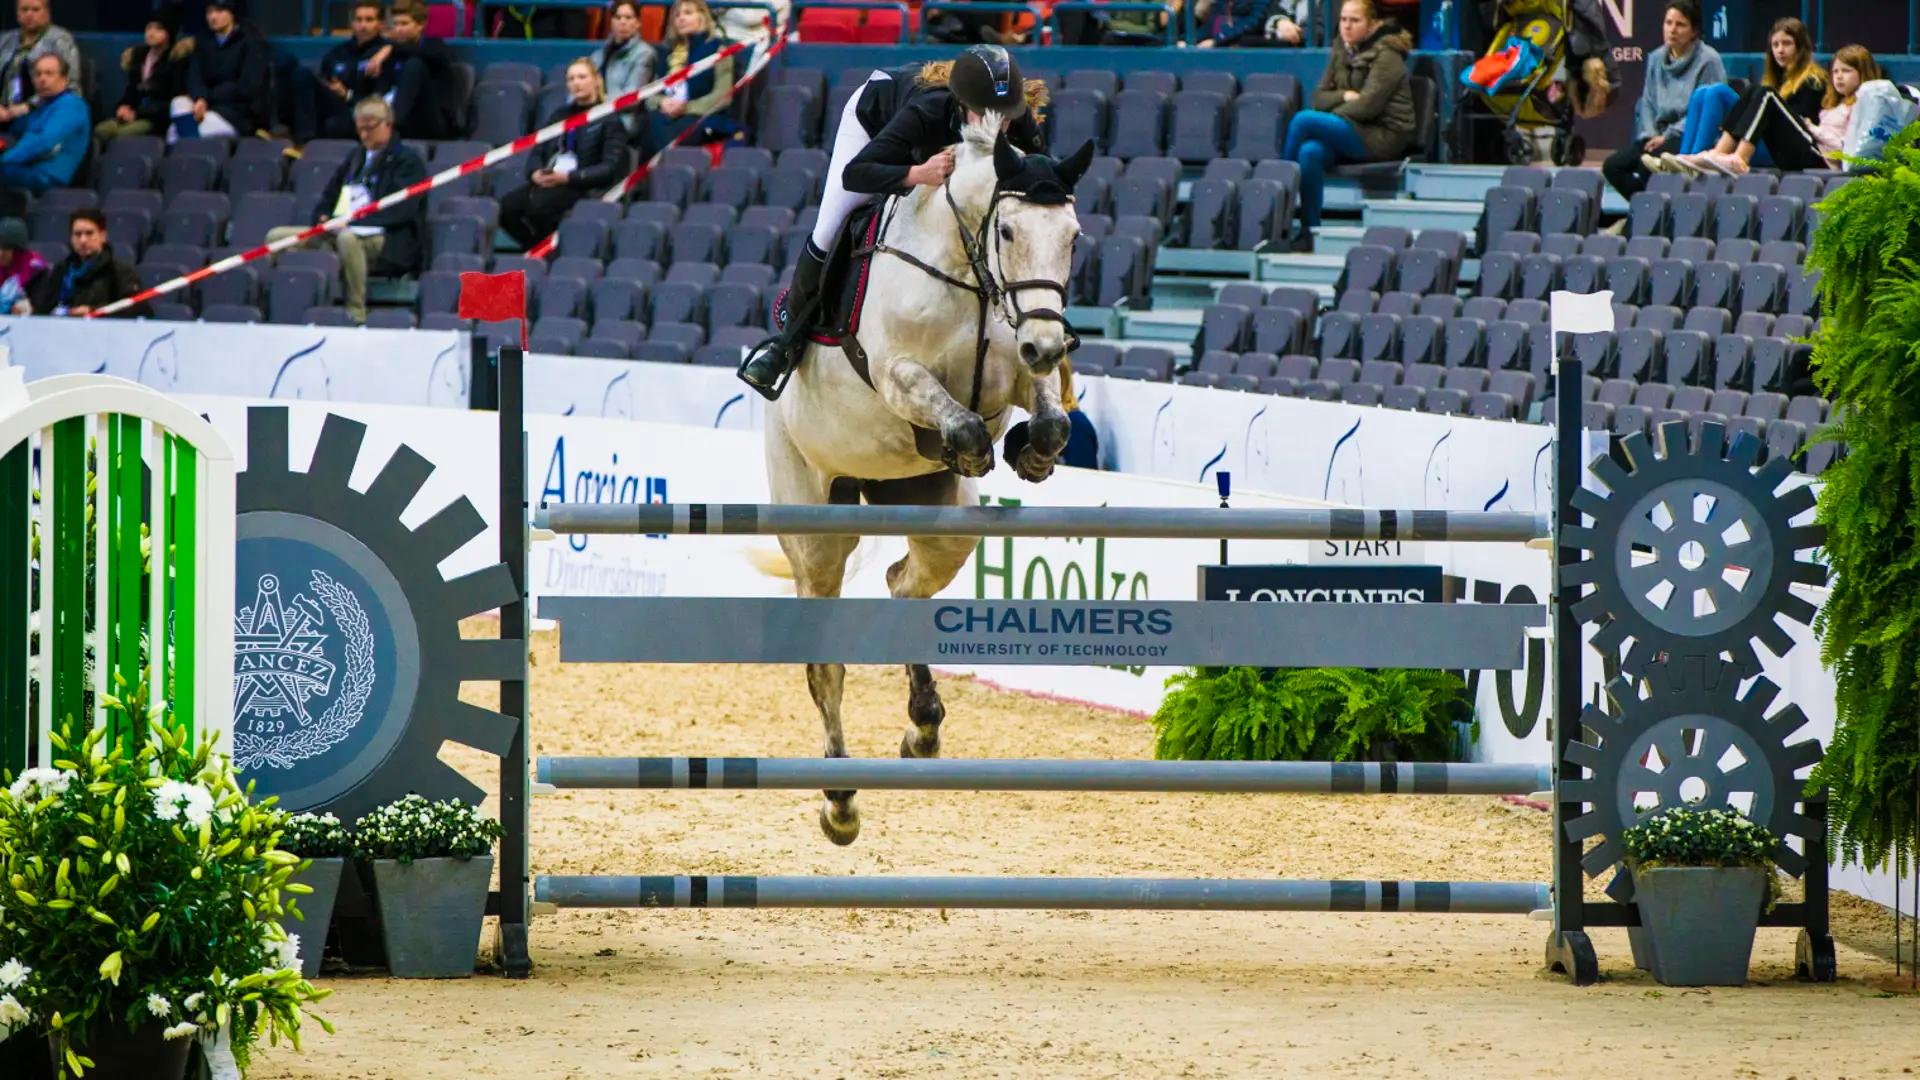 Chalmershindret 2018 took place at the Scandinavium arena in Gothenburg as part of the Gothenburg Horse Show. The fence measures the horse's jump and landing. 